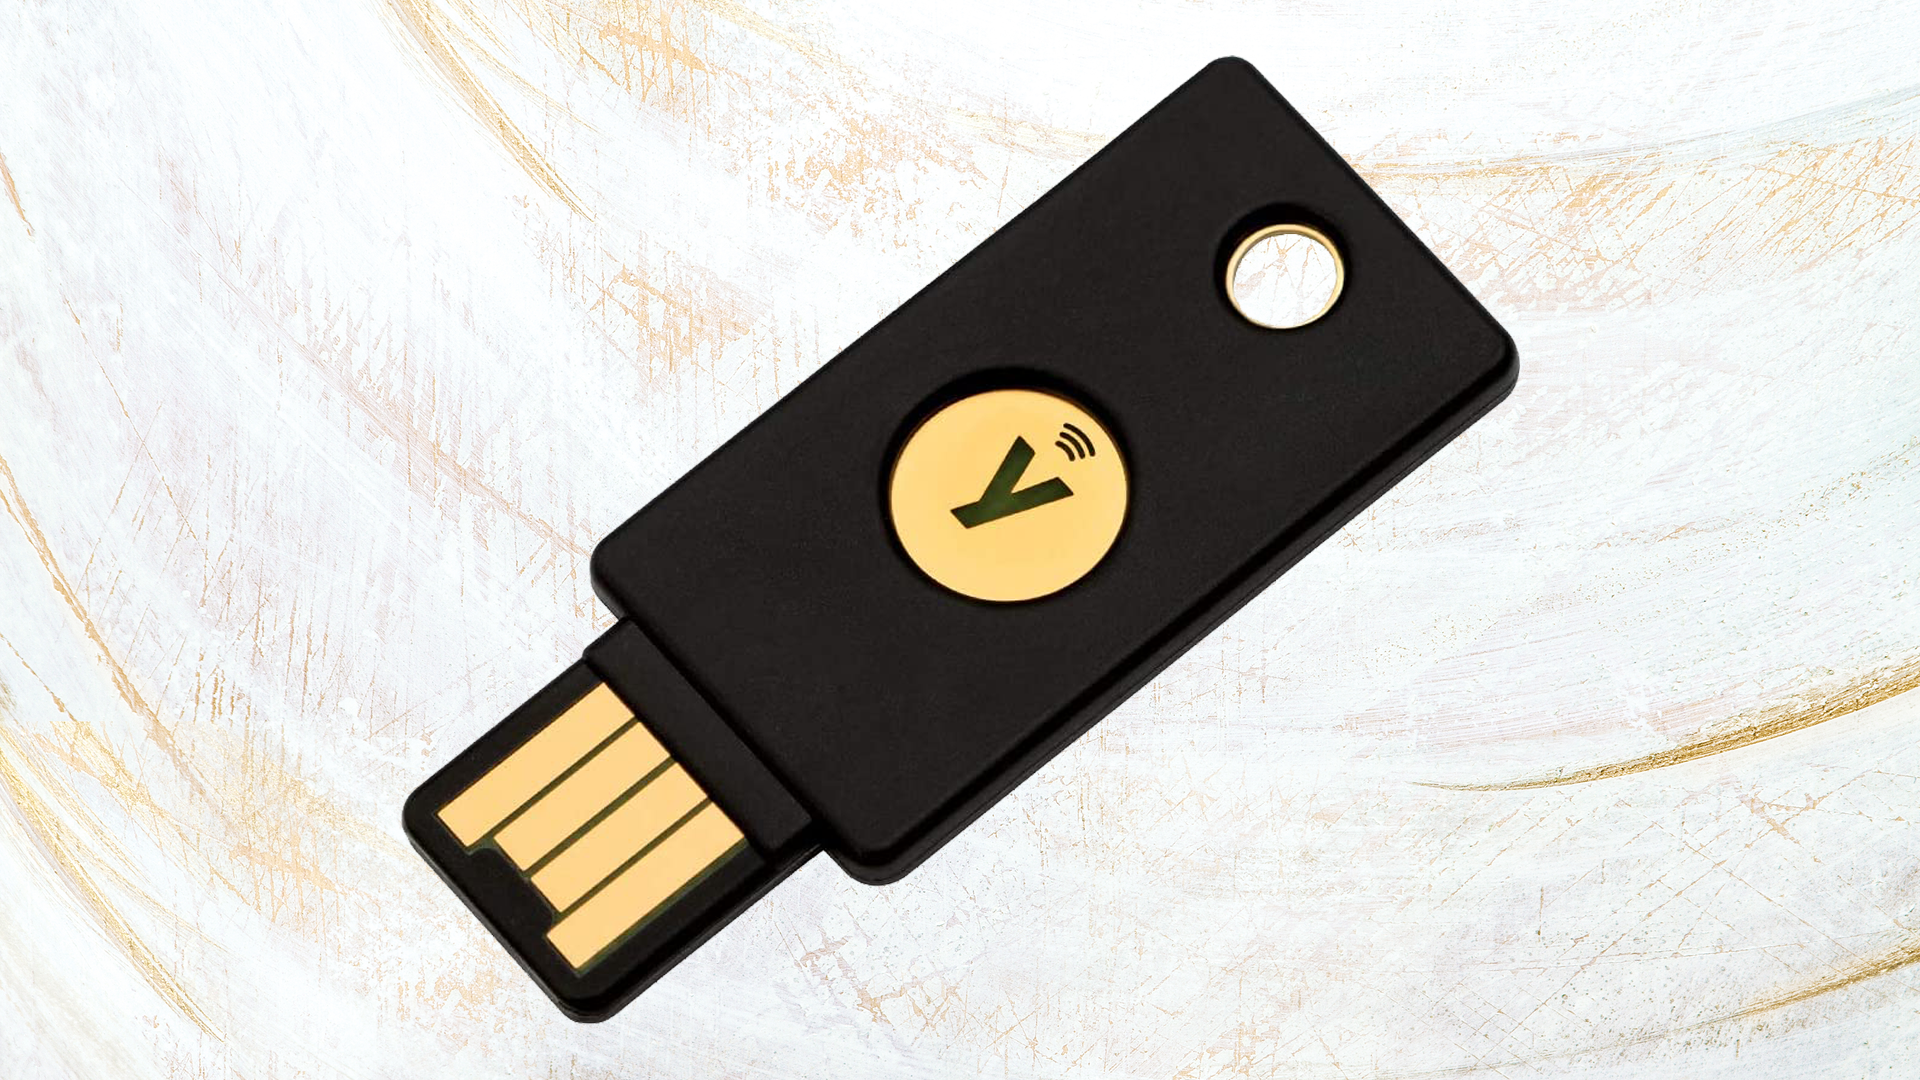 YubiKey security key on a white and gold antique painted and carved textured background